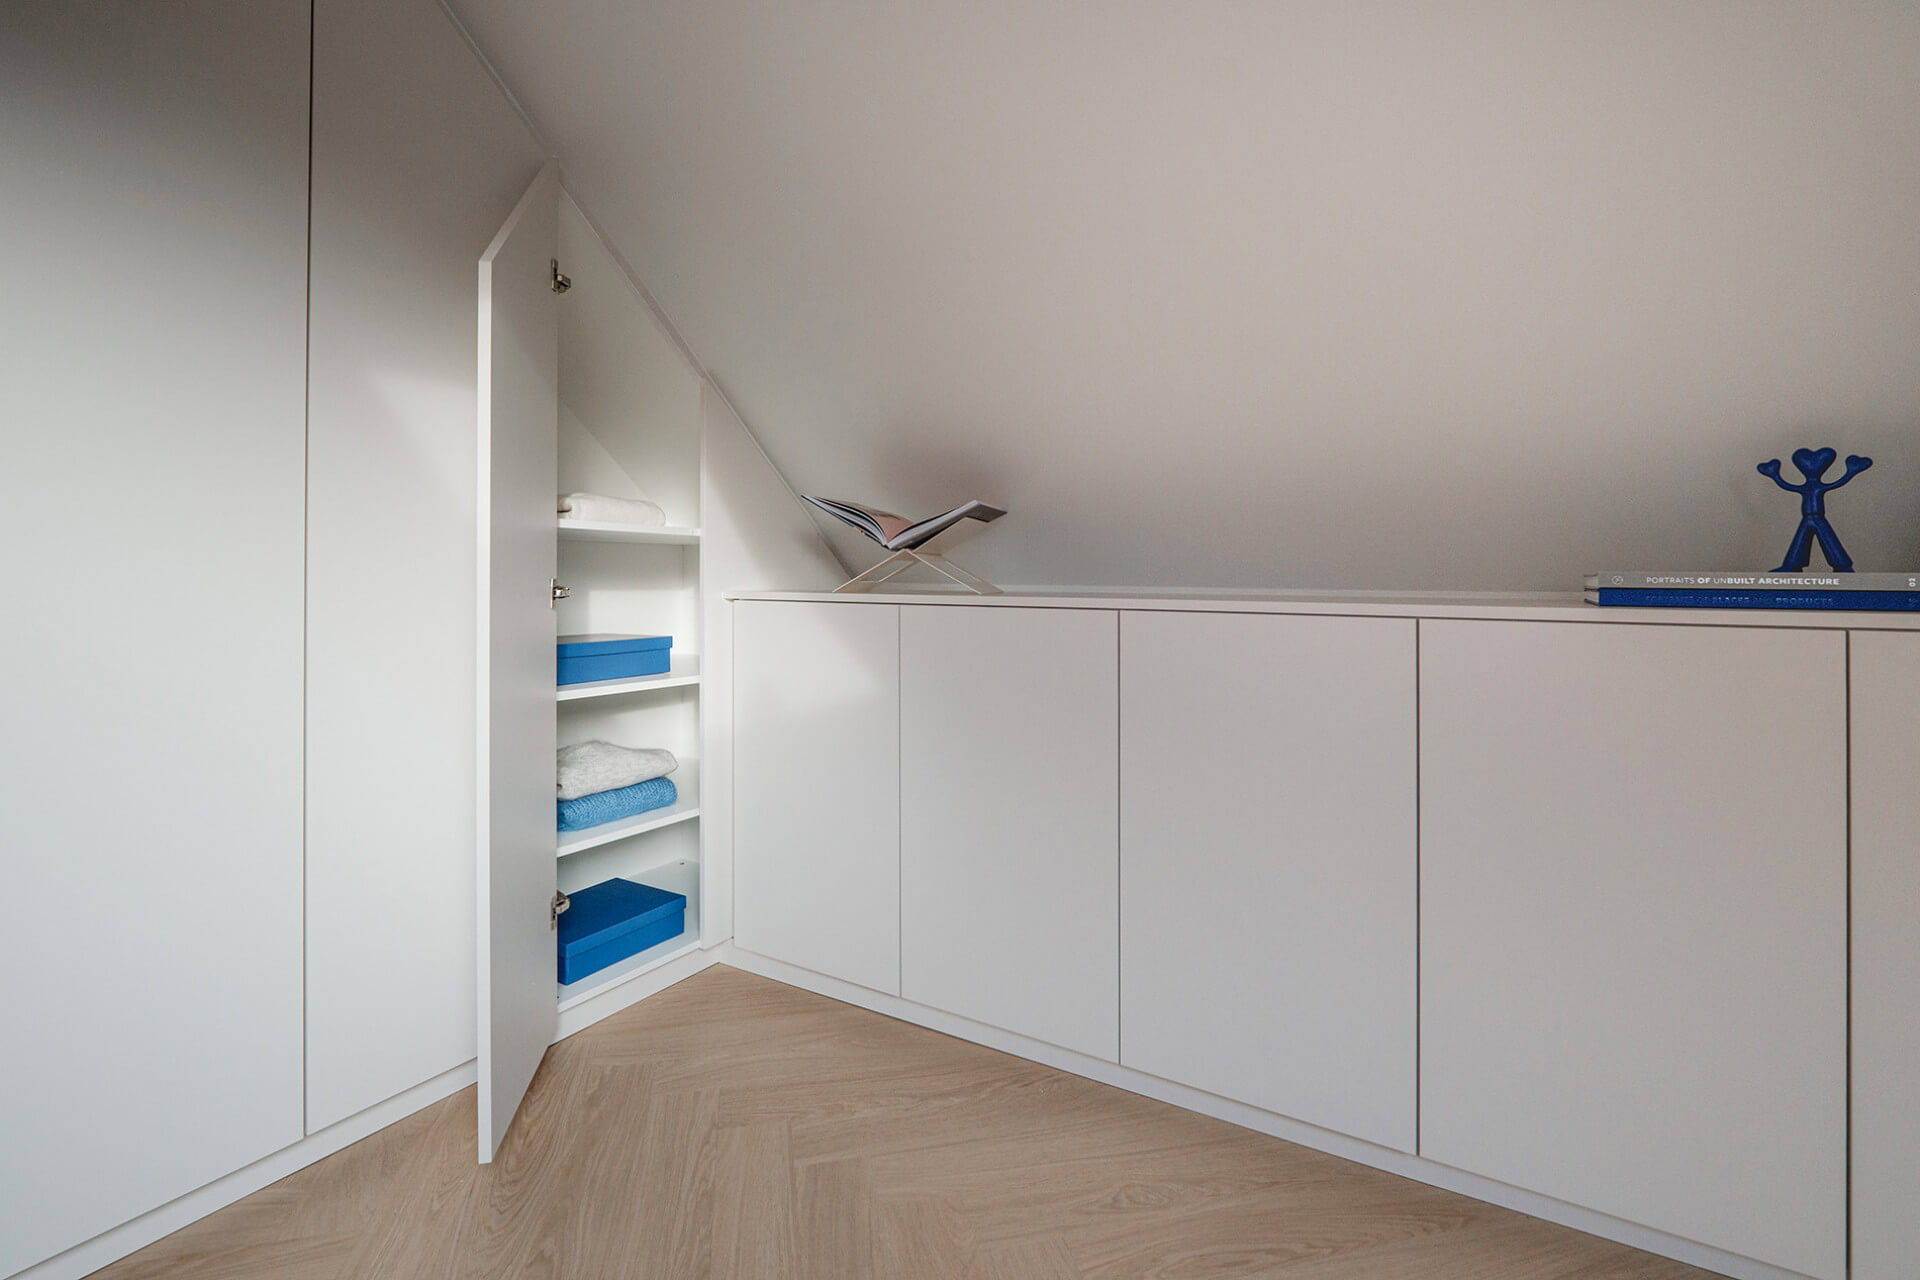 Custom storage cabinet designed for under a sloping roof, from MaatkastenOnline.